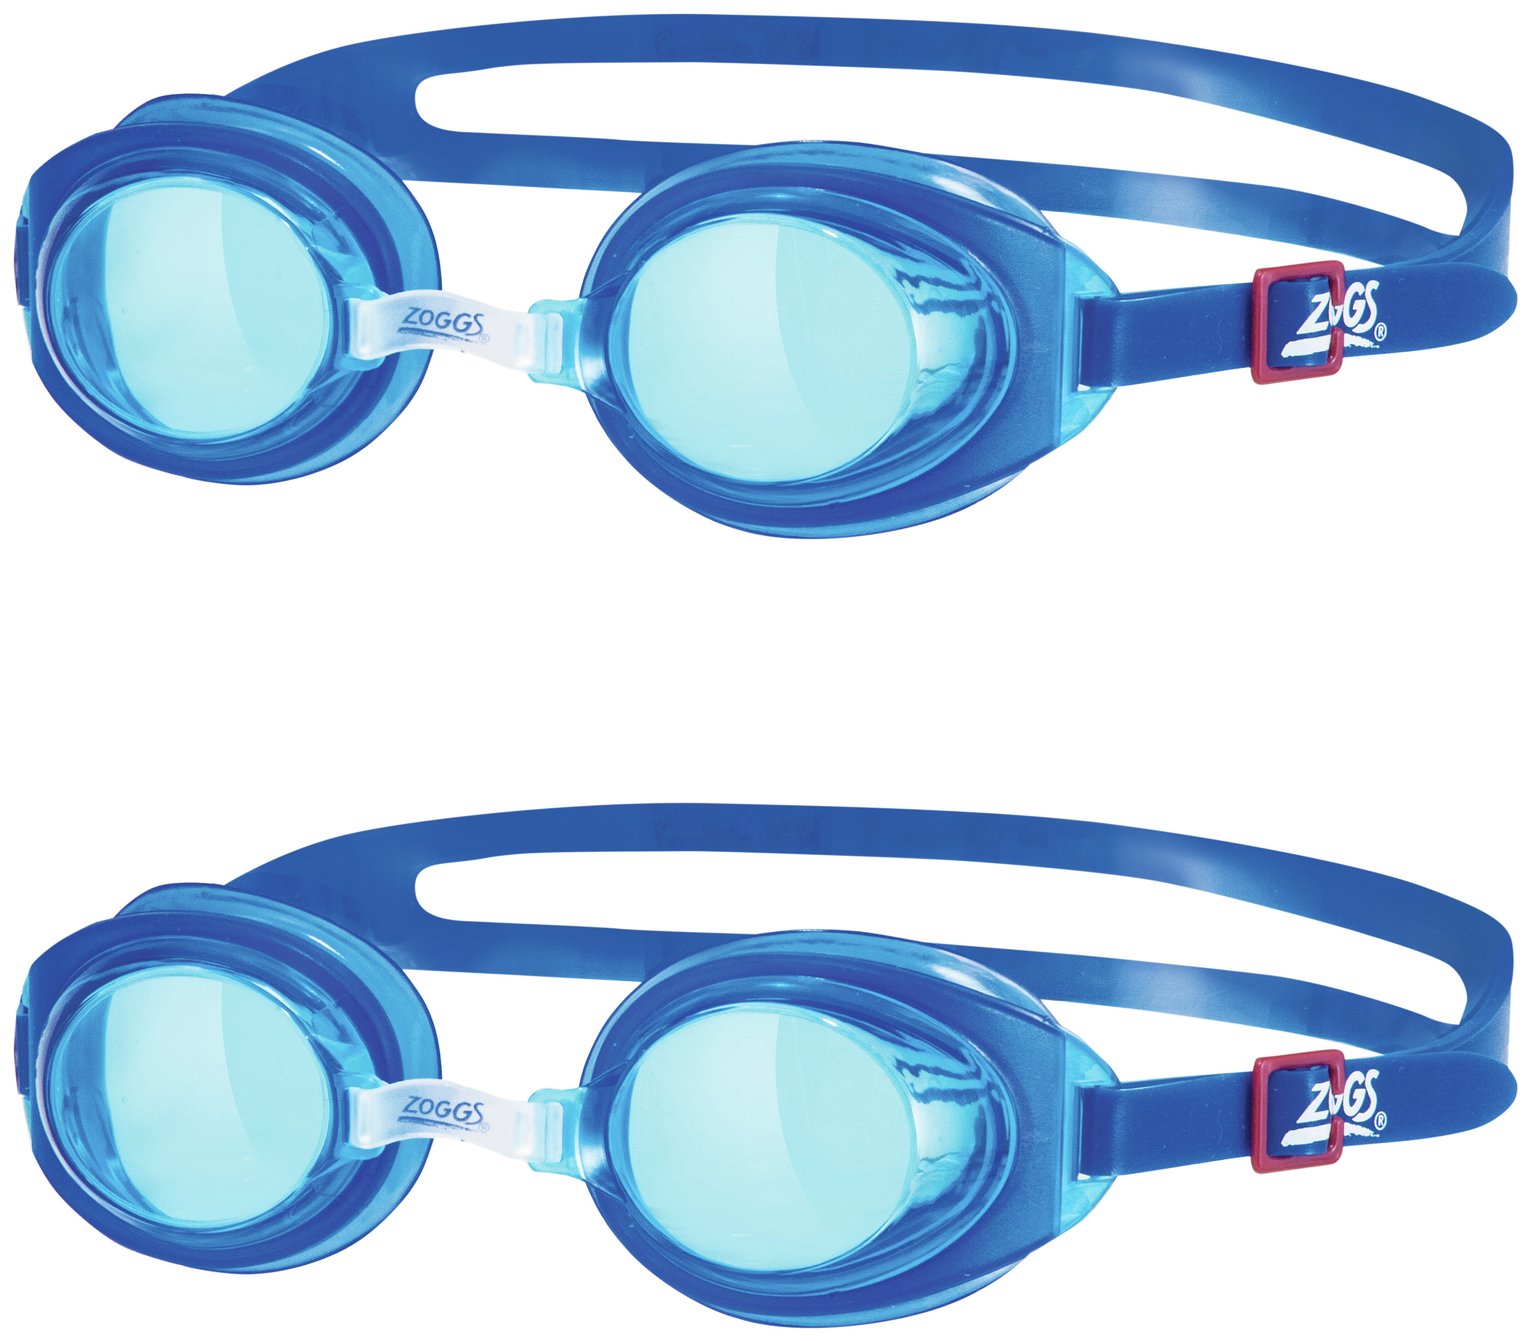 Zoggs Pack of 2 Junior Ripper Goggles review